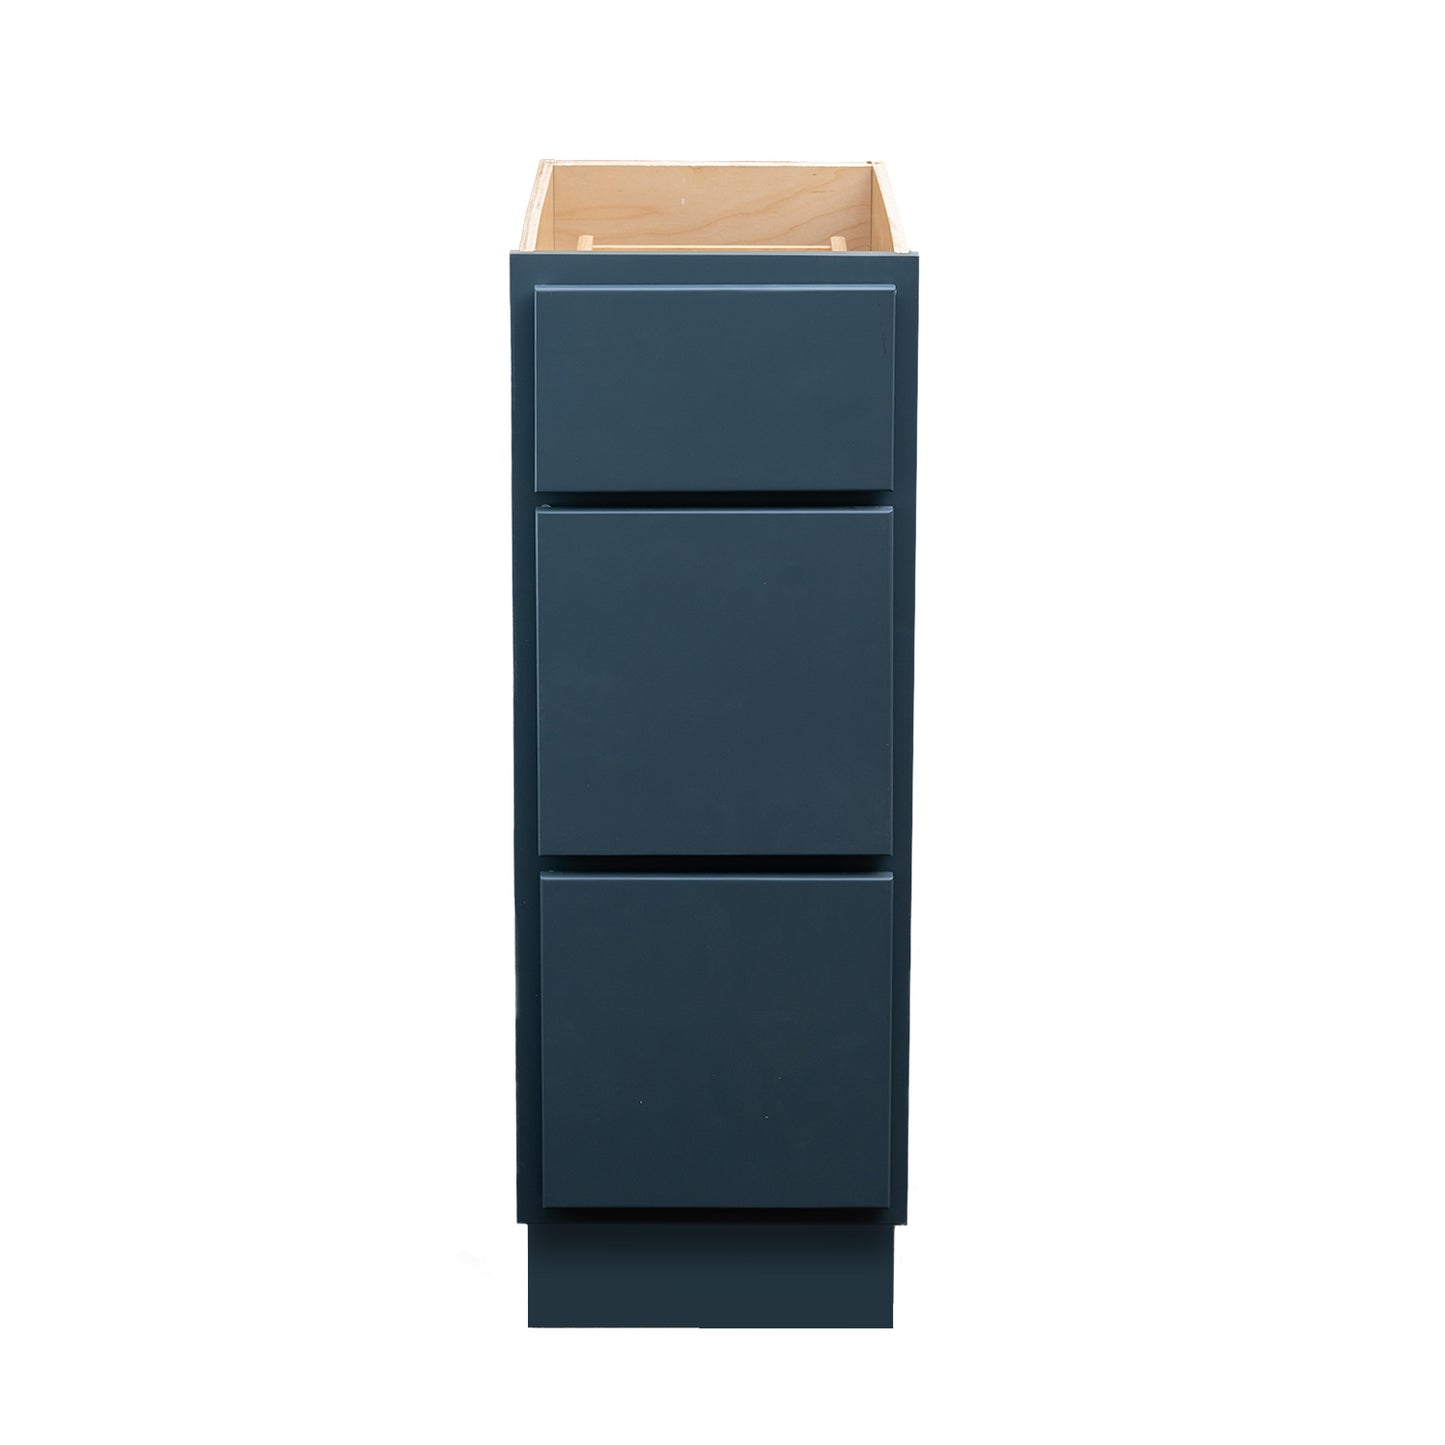 Quicklock RTA (Ready-to-Assemble) Needlepoint Navy 3 Drawer Vanity Base Cabinet | 12"Wx34.5"Hx21"D